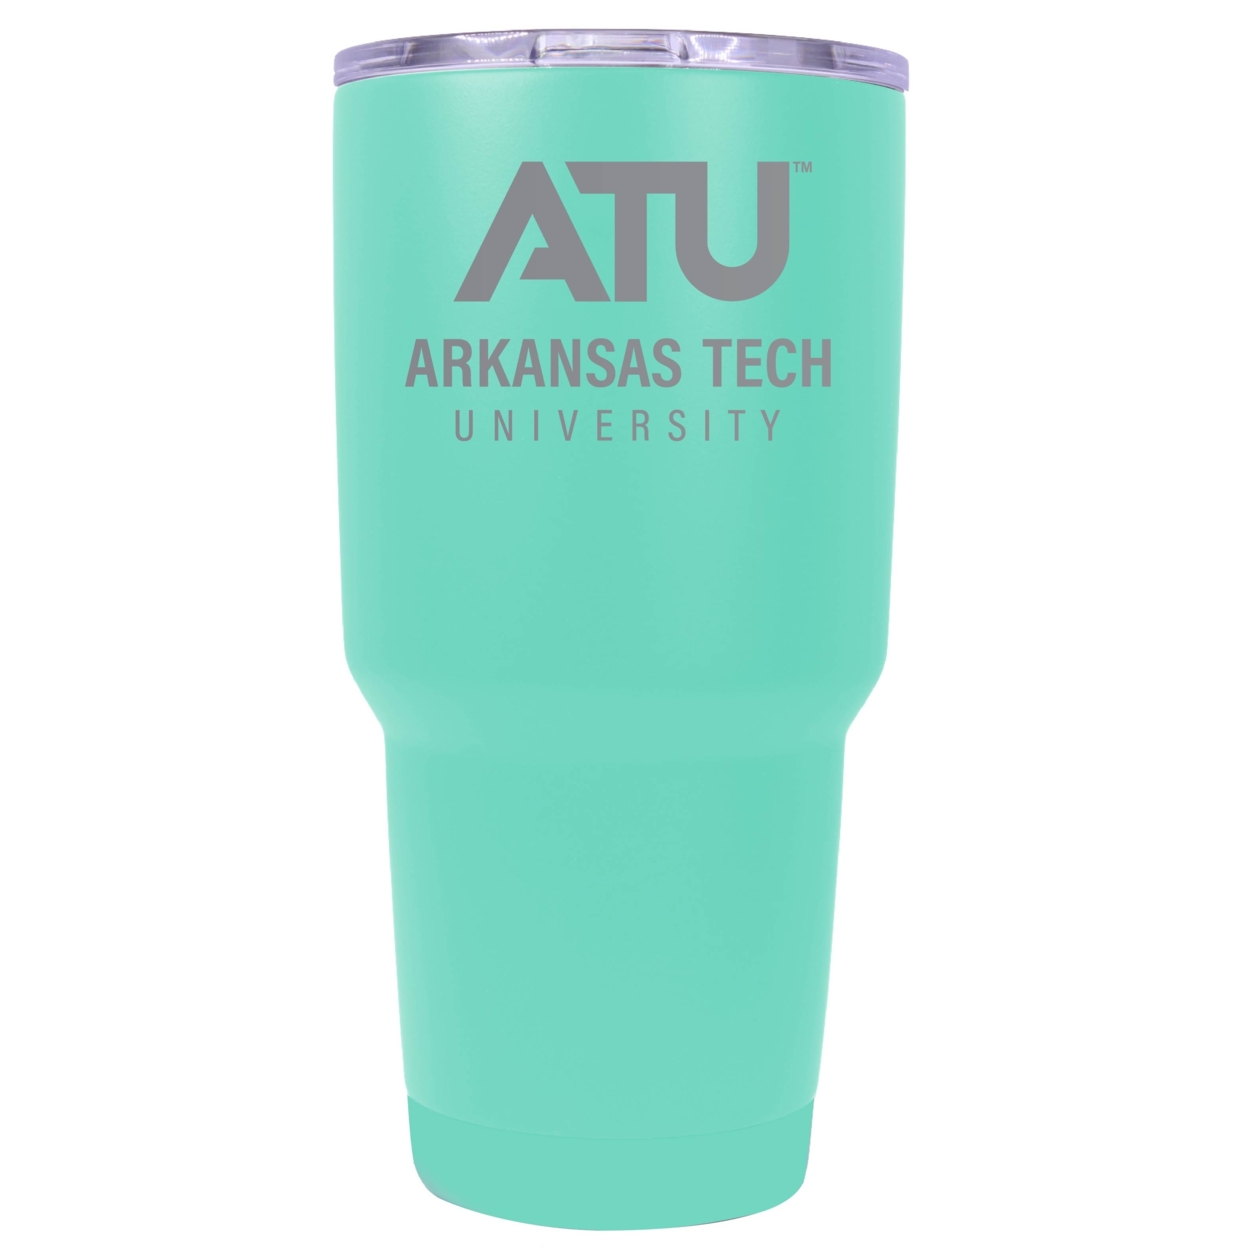 Arkansas Tech University 24 Oz Insulated Tumbler Etched - Choose Your Color - Coral